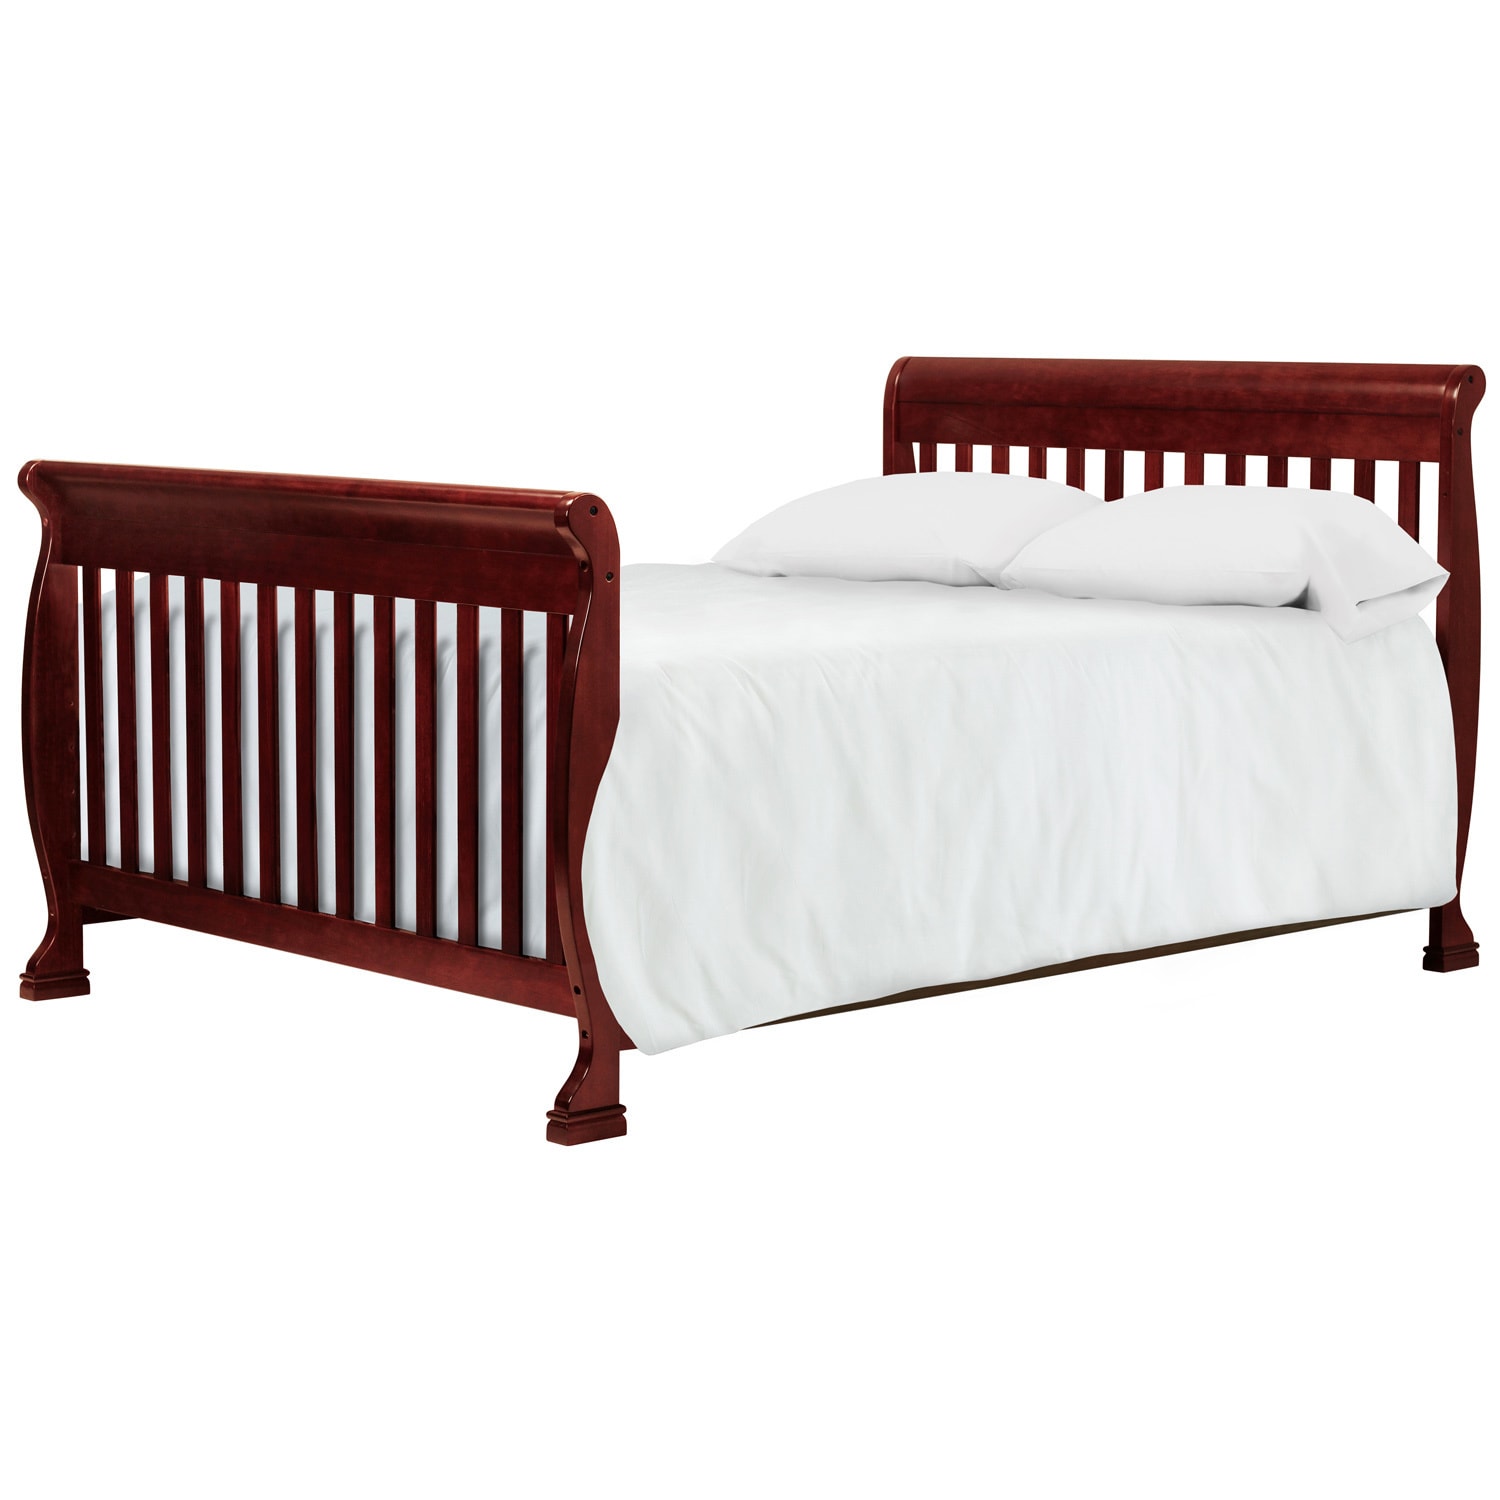 Davinci Twin Full Size Bed Conversion Kit Overstock 4664993